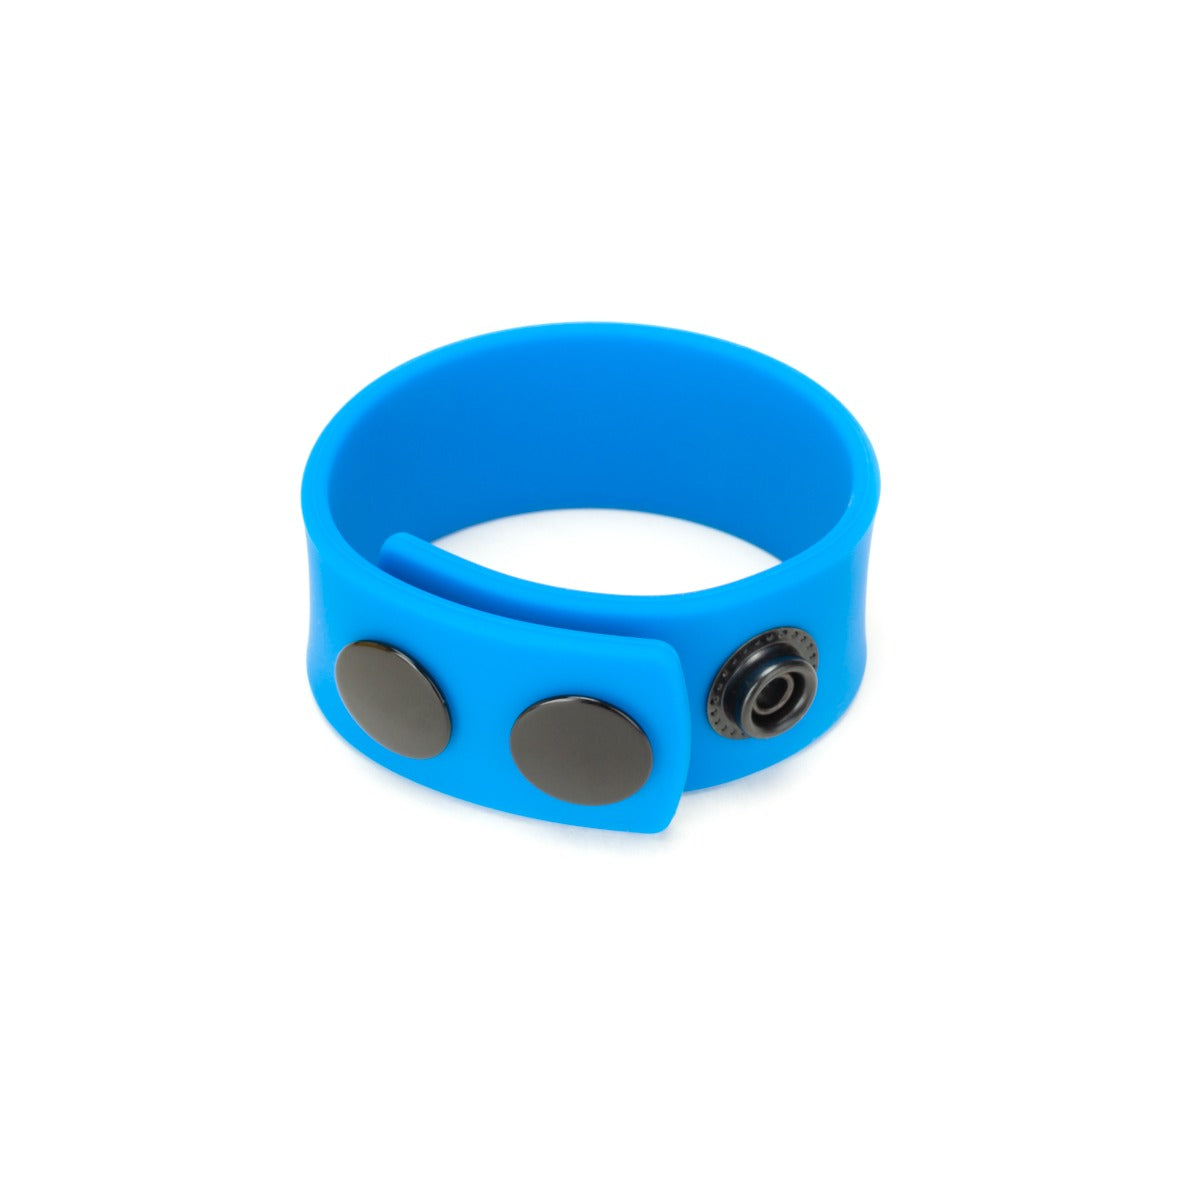 a blue bracelet with two circles on it